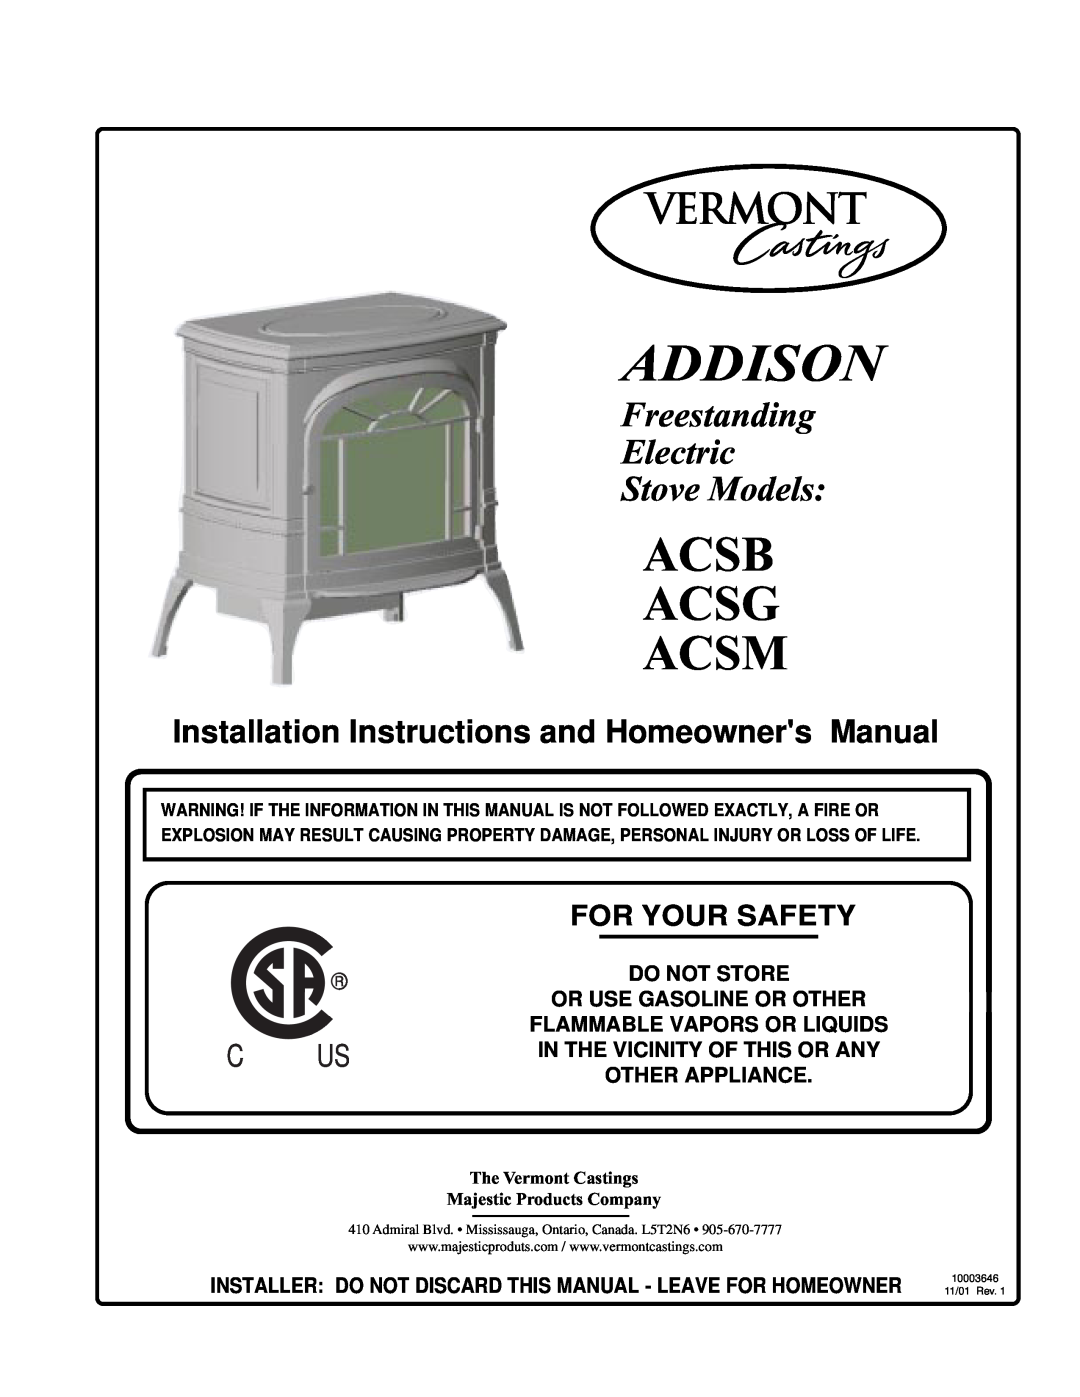 Vermont Casting ACSG installation instructions Addison, Acsb Acsg Acsm, Freestanding Electric Stove Models, Do Not Store 